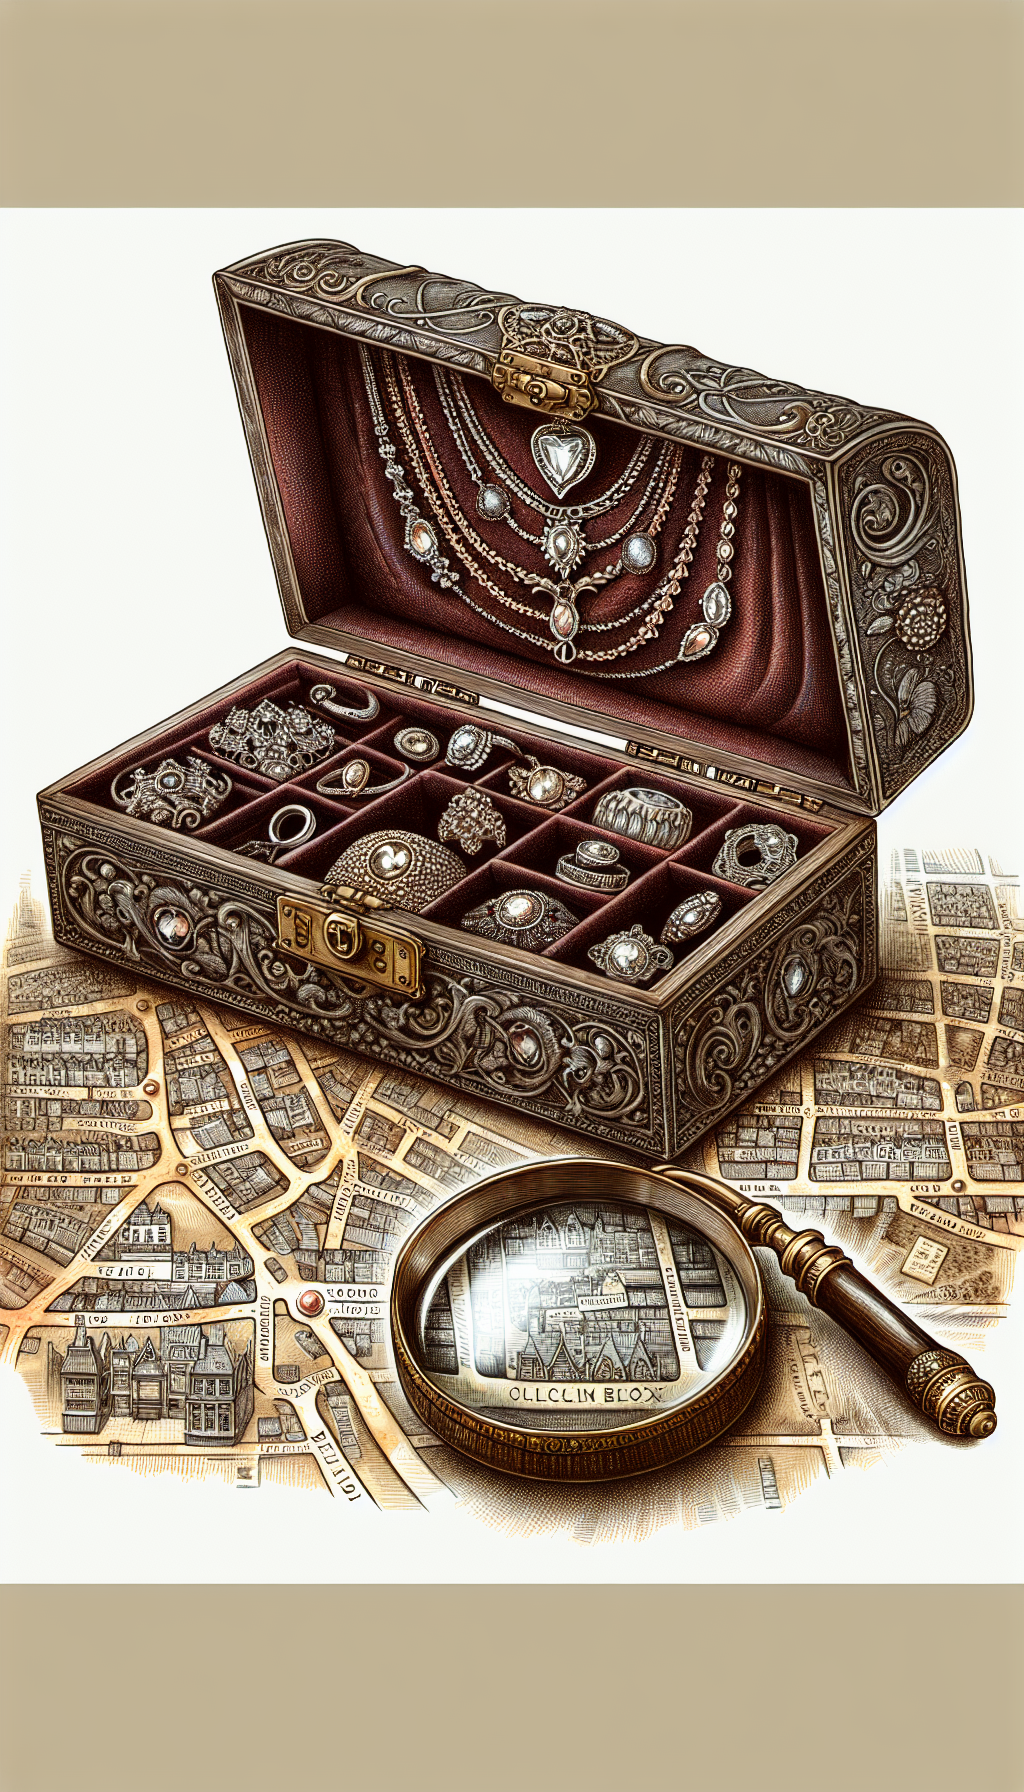 An intricately drawn antique jewelry box, slightly ajar, revealing a glimmering array of vintage jewelry pieces. Nested on an illustrated vintage map that highlights local streets and pinpoints, symbolizing 'near me', with an elegant magnifying glass overlaying the map and zooming in on a sparkling brooch to imply professional appraisal.